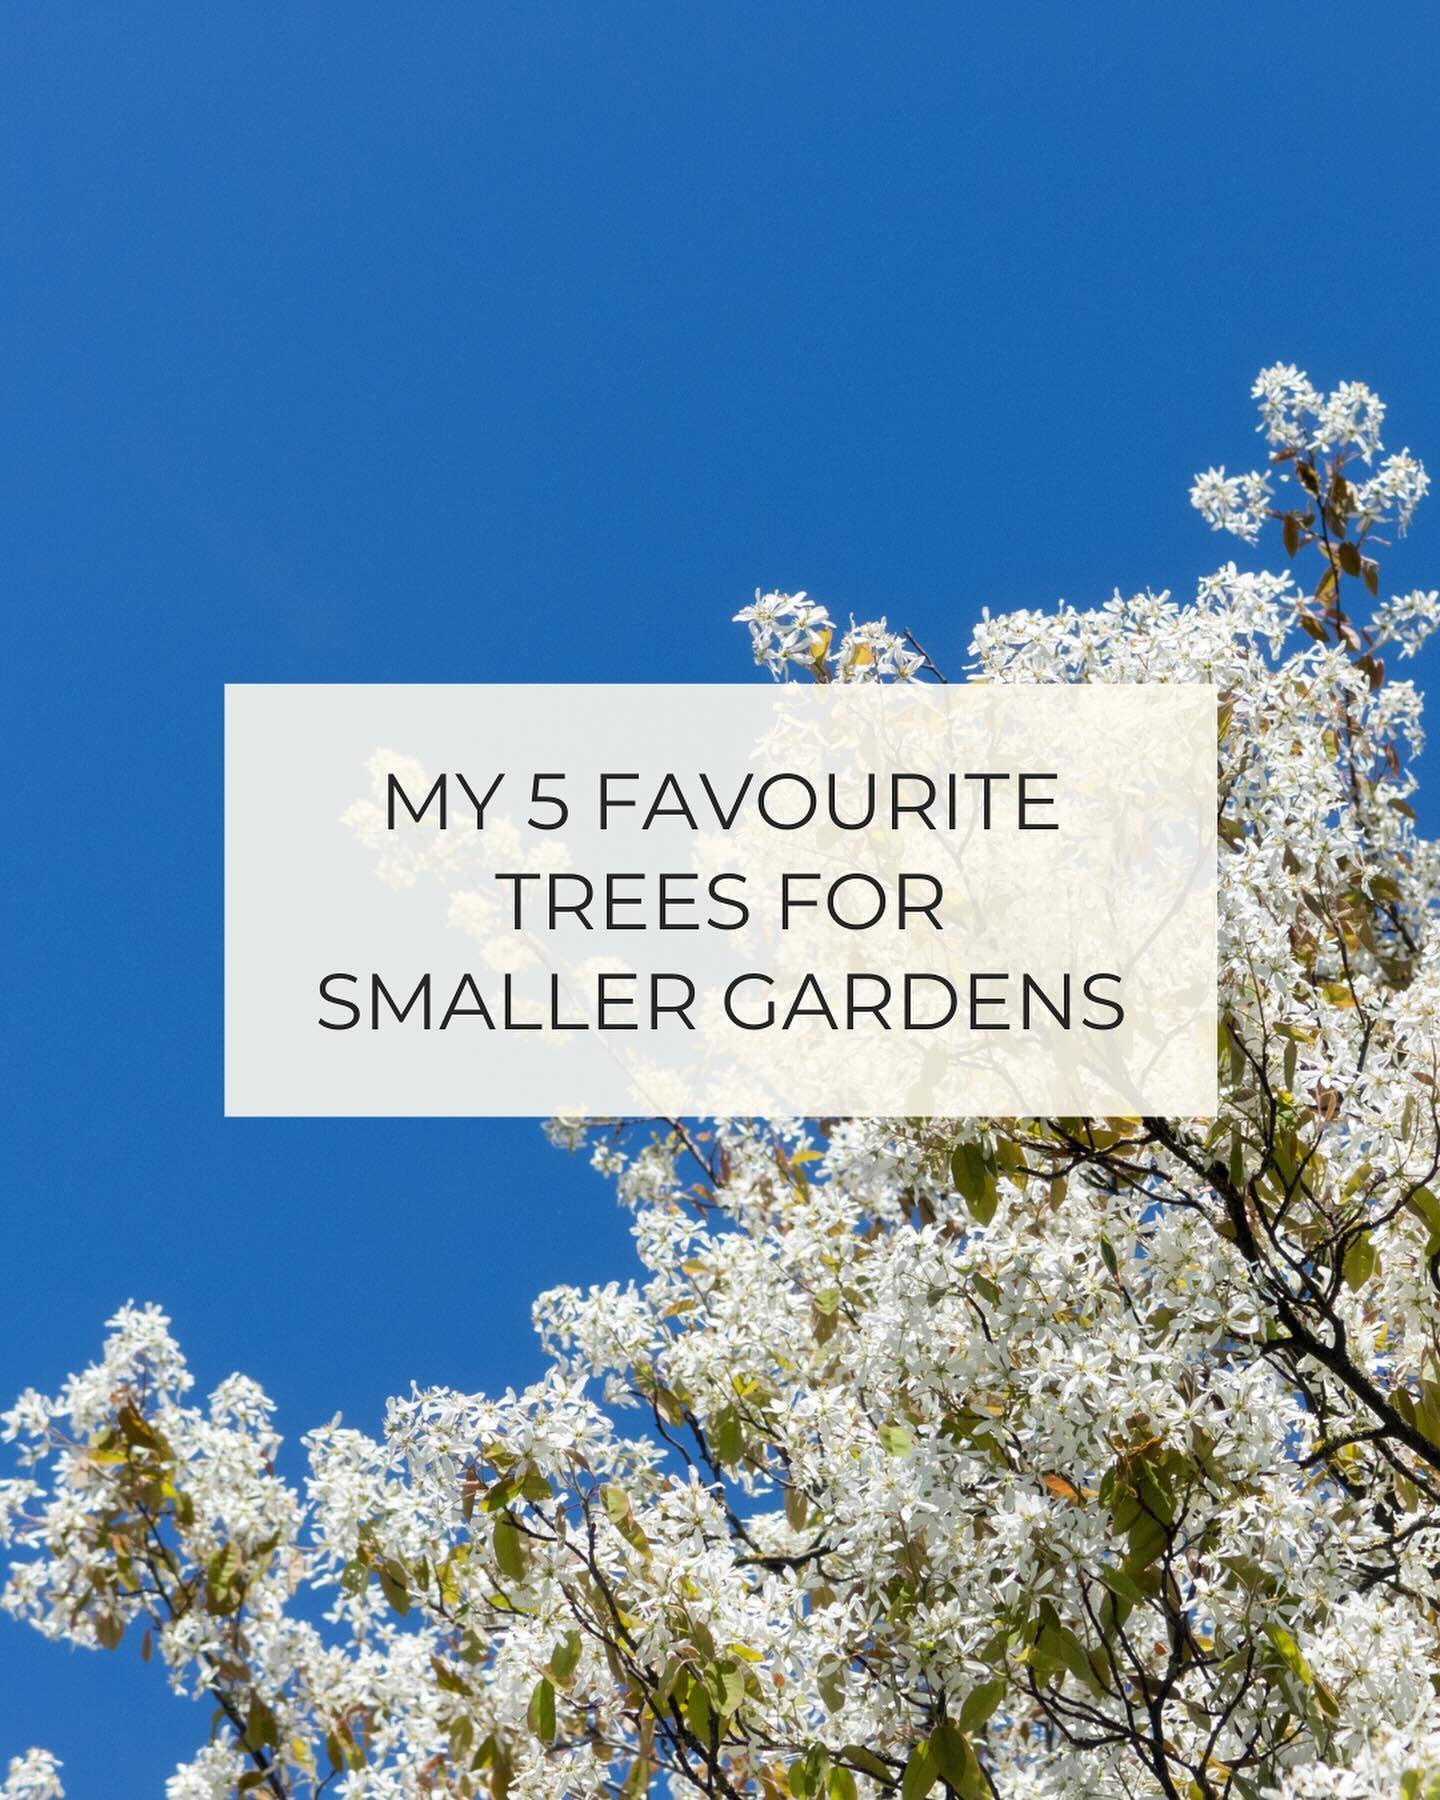 Every garden needs a tree, even the smallest of spaces. Fact!

Over the last few weeks I&rsquo;ve done some consultations that have focussed on tree choices so I thought I&rsquo;d choose 5 of my faves for smaller spaces: 

1) Malus Evereste 
2) Prunu